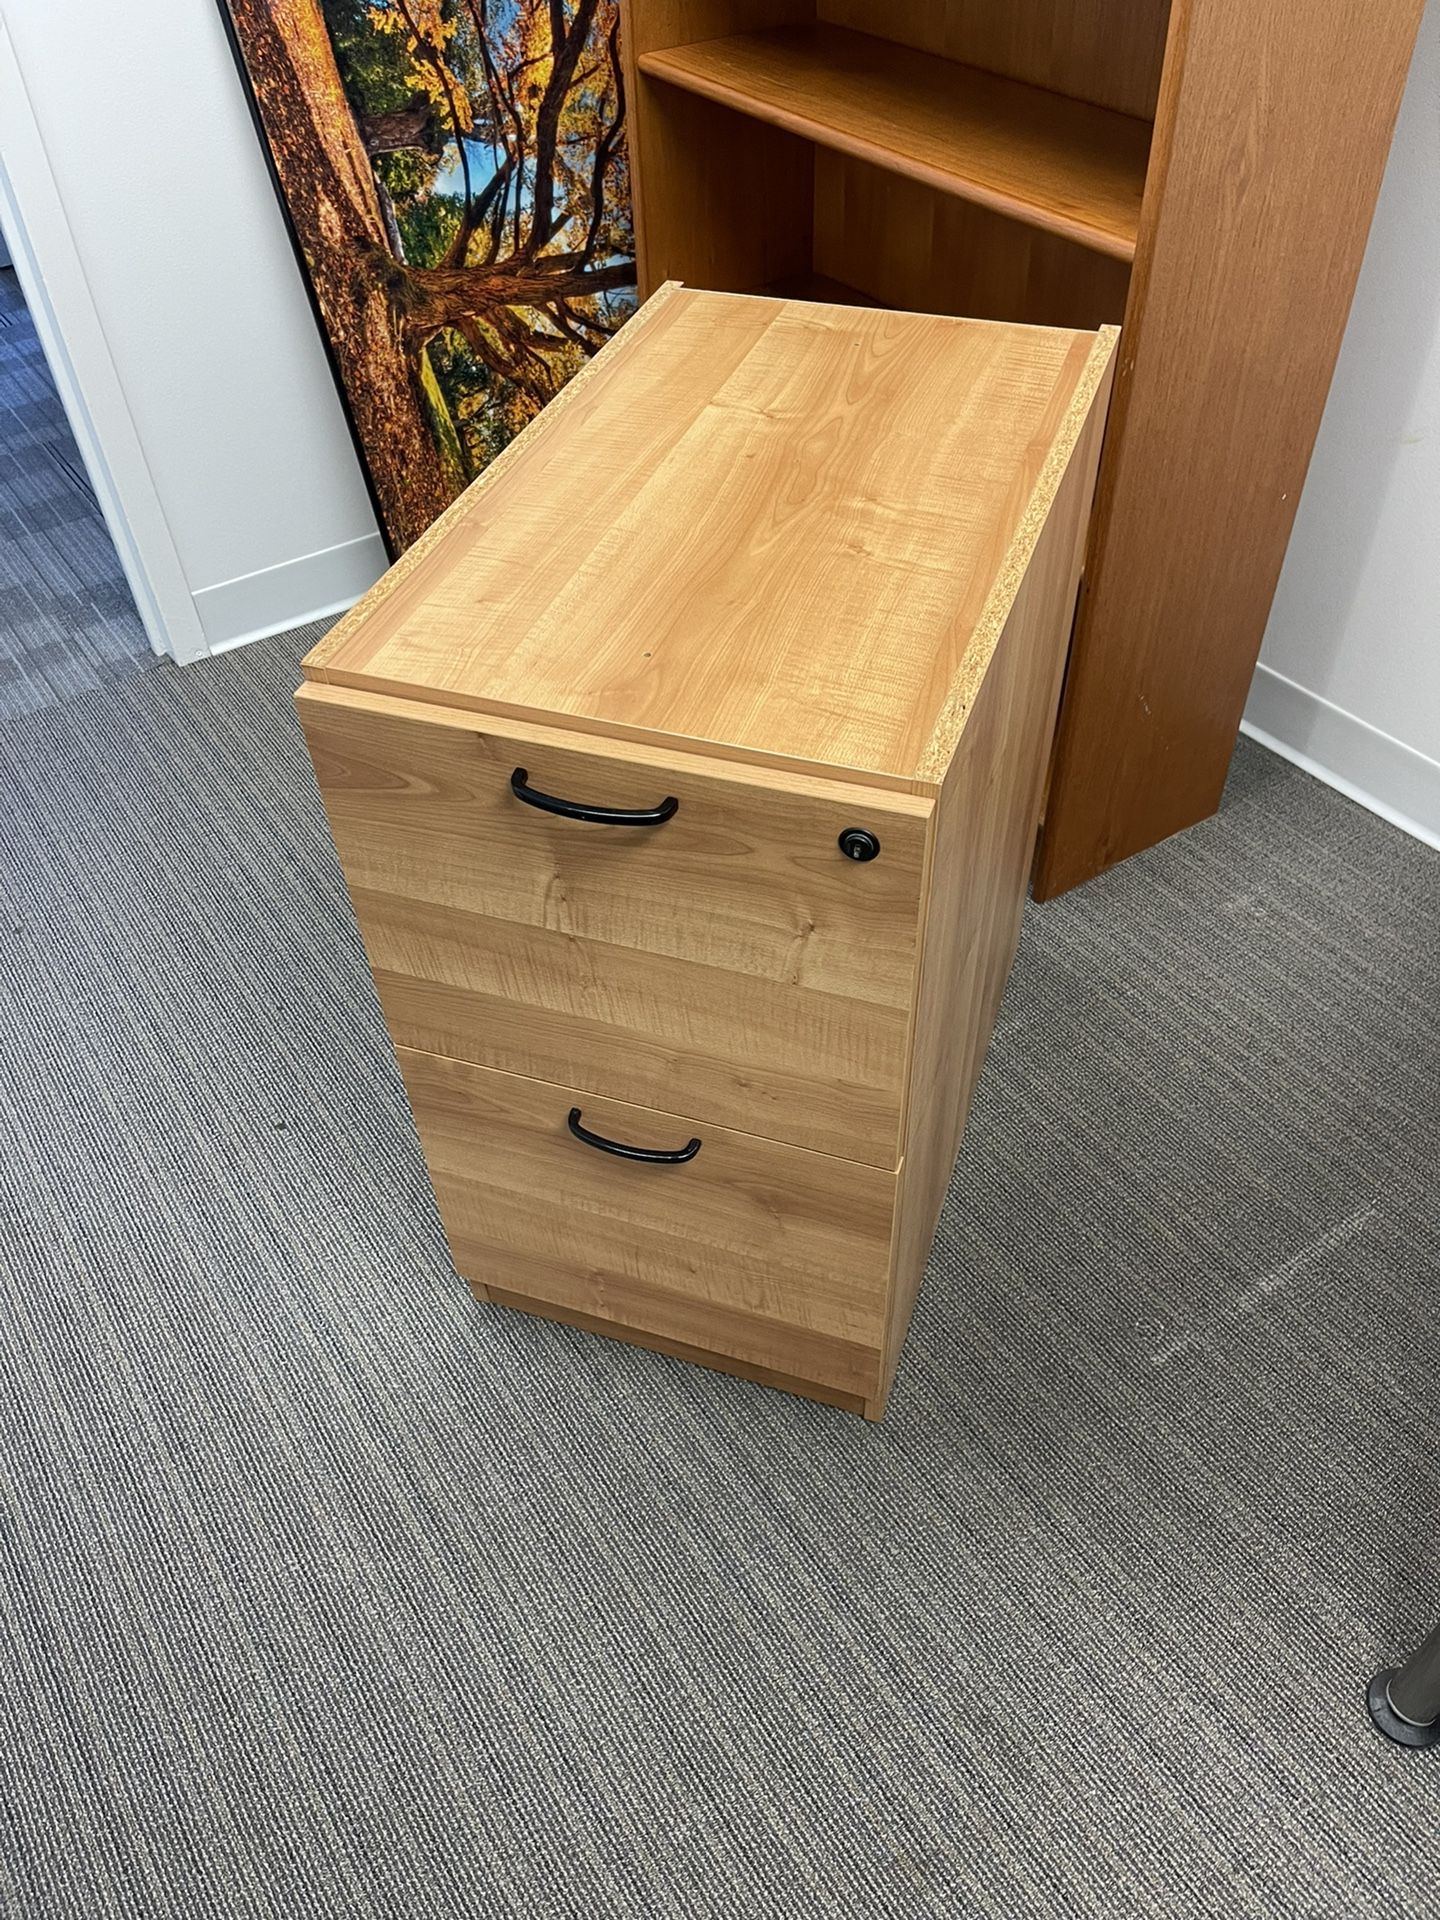 Wood Filing Cabinet With Lock/key